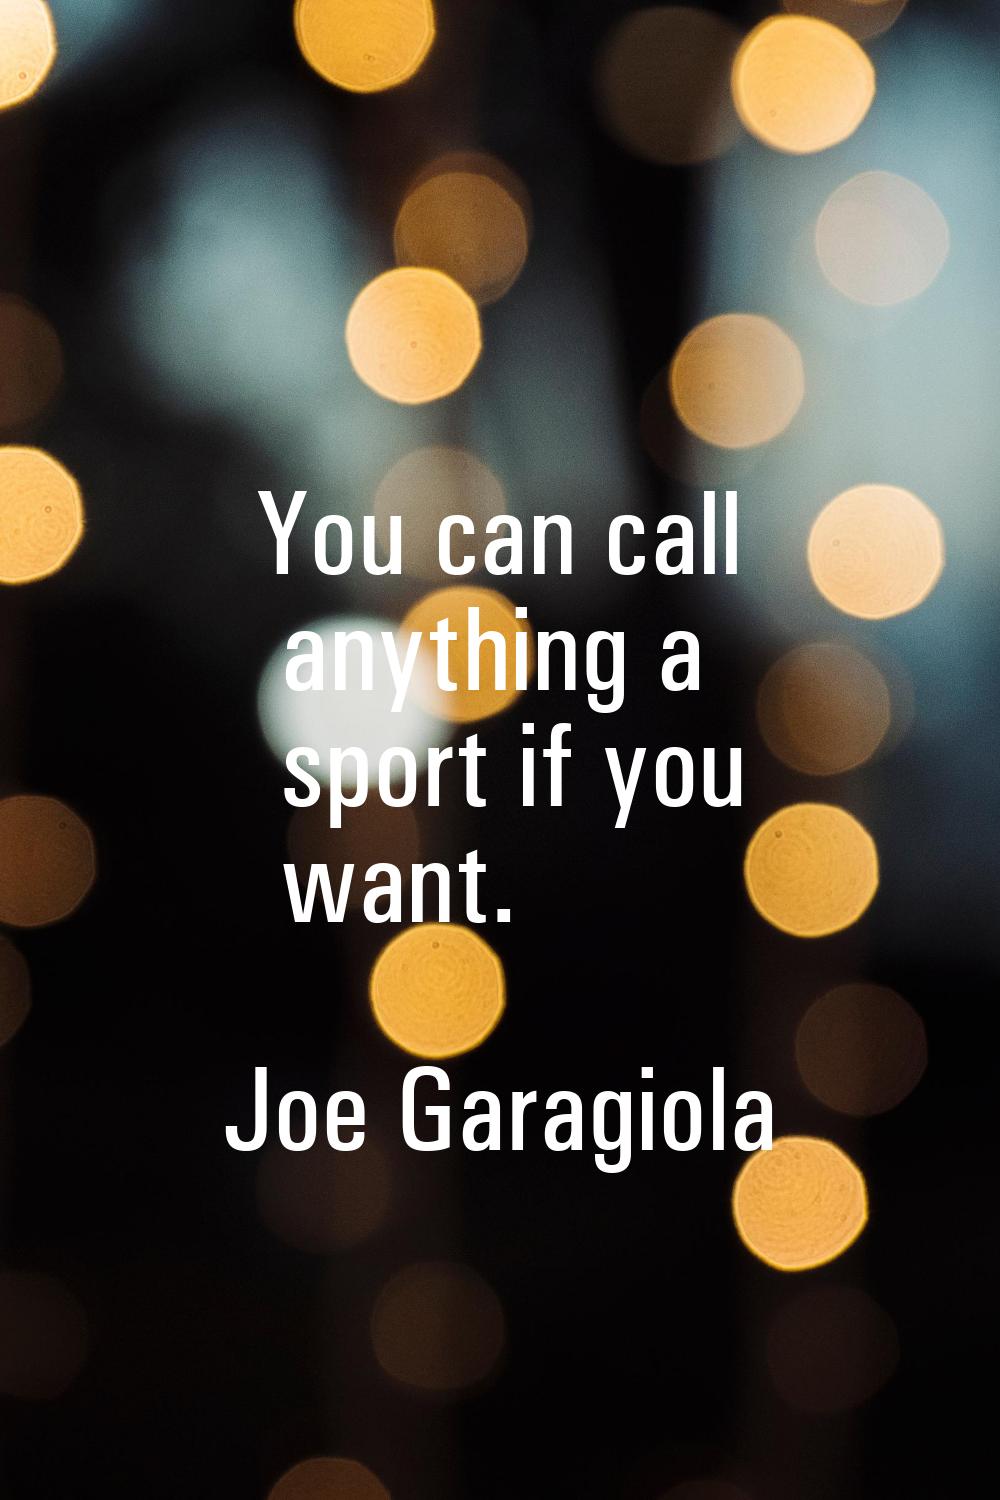 You can call anything a sport if you want.